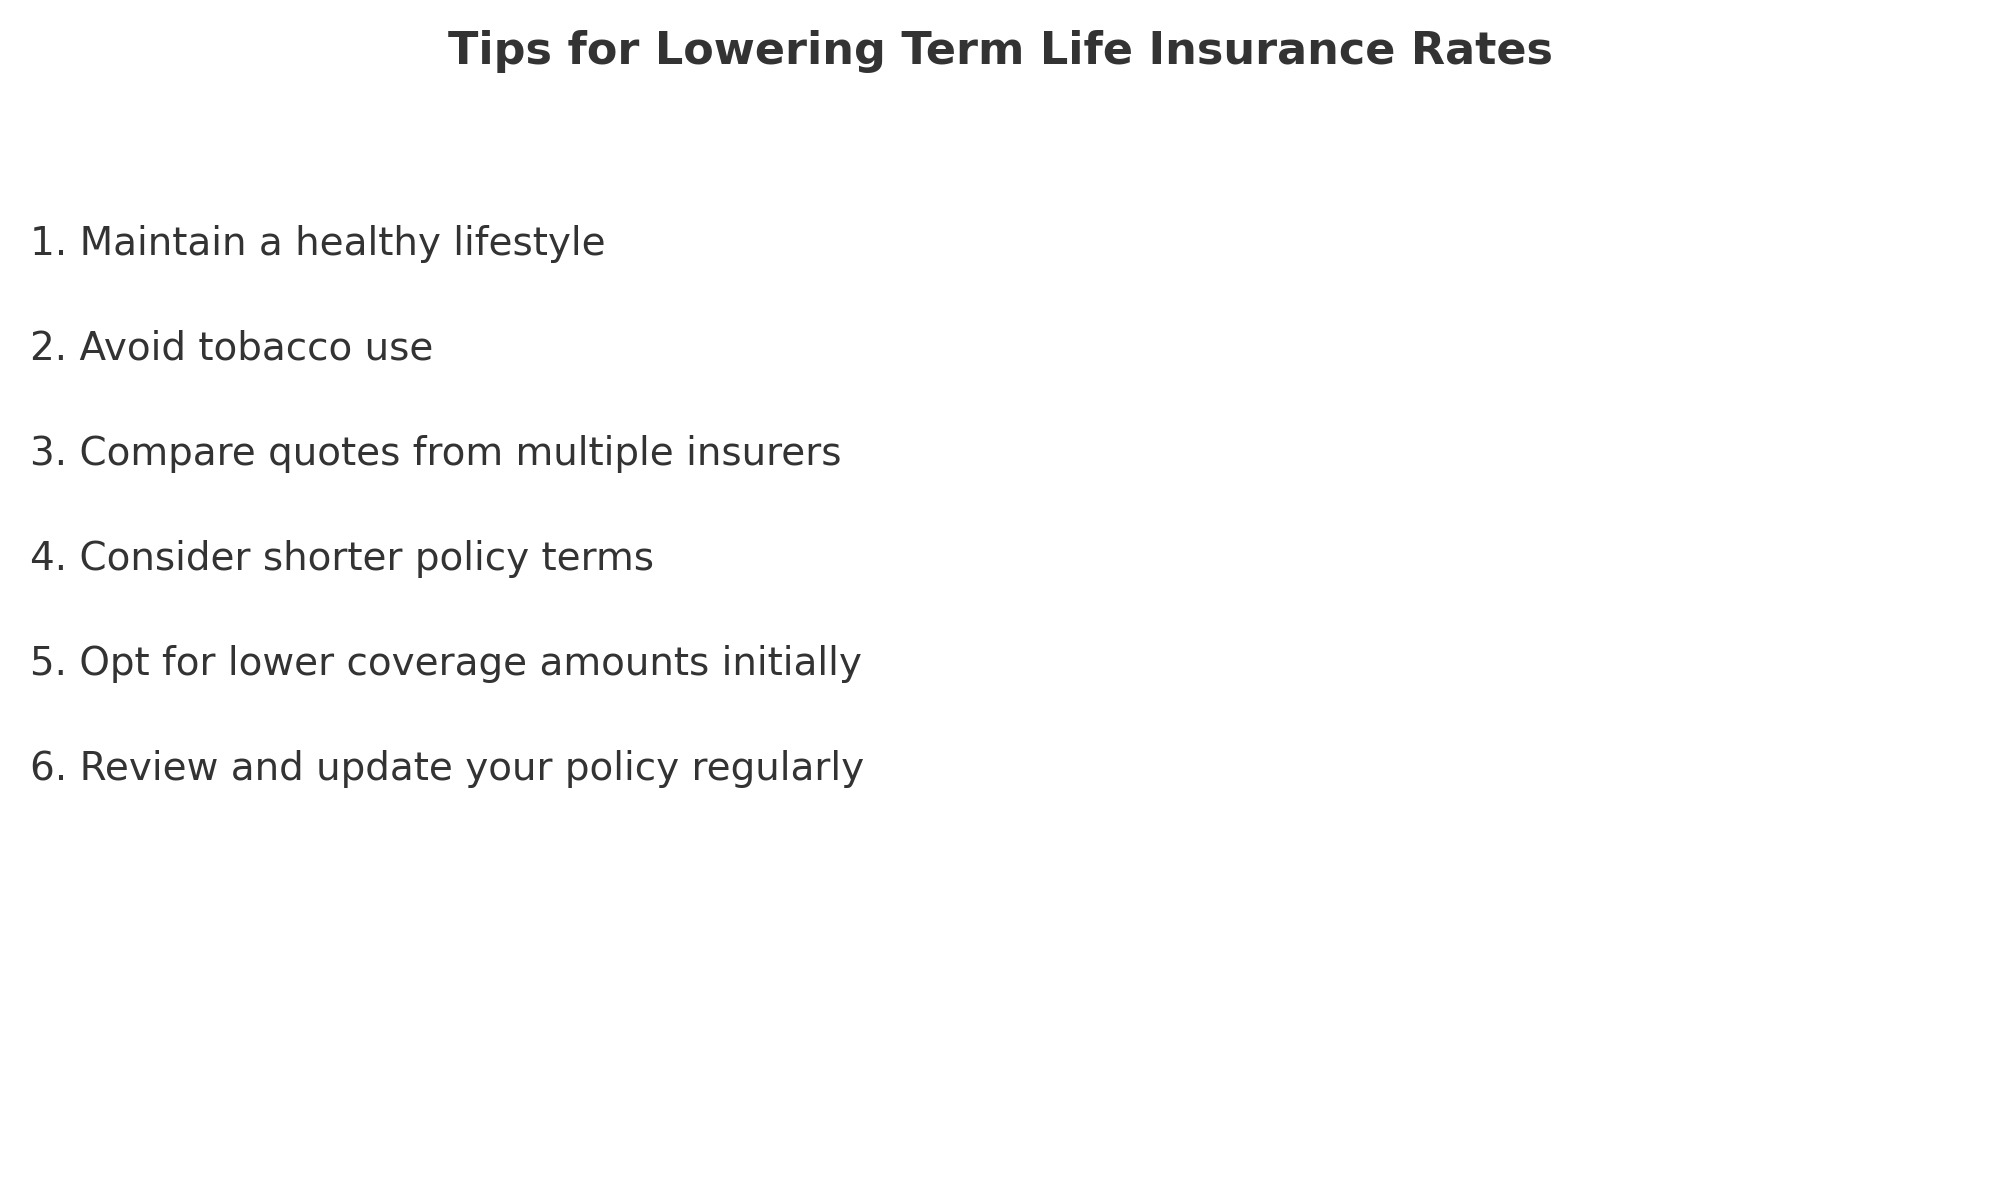 Top 10 Term Life Insurance Rates You Can't Miss: Unlock Affordable Peace of Mind, Tips For Lowering Rates